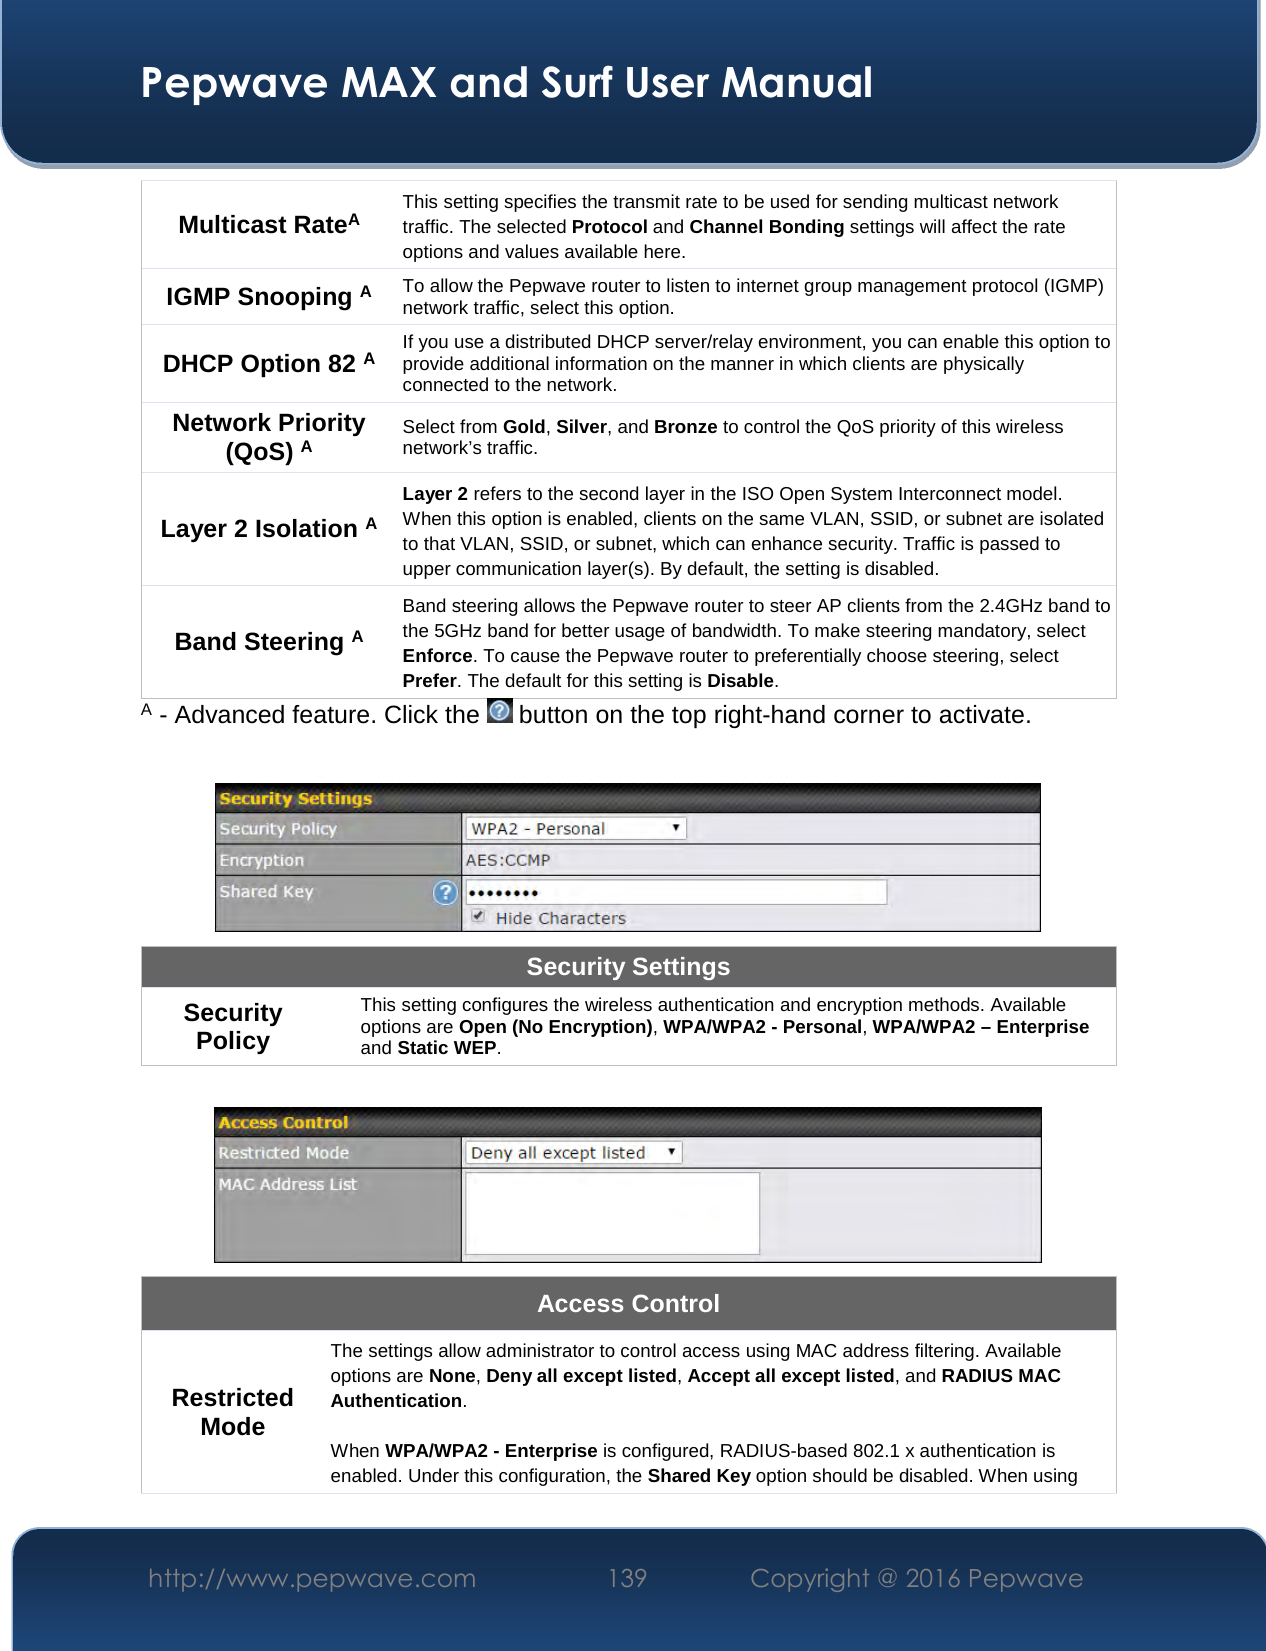  Pepwave MAX and Surf User Manual http://www.pepwave.com  139    Copyright @ 2016 Pepwave   Multicast RateA This setting specifies the transmit rate to be used for sending multicast network traffic. The selected Protocol and Channel Bonding settings will affect the rate options and values available here. IGMP Snooping A To allow the Pepwave router to listen to internet group management protocol (IGMP) network traffic, select this option. DHCP Option 82 A If you use a distributed DHCP server/relay environment, you can enable this option to provide additional information on the manner in which clients are physically connected to the network. Network Priority (QoS) A Select from Gold, Silver, and Bronze to control the QoS priority of this wireless network’s traffic. Layer 2 Isolation A Layer 2 refers to the second layer in the ISO Open System Interconnect model. When this option is enabled, clients on the same VLAN, SSID, or subnet are isolated to that VLAN, SSID, or subnet, which can enhance security. Traffic is passed to upper communication layer(s). By default, the setting is disabled.  Band Steering A Band steering allows the Pepwave router to steer AP clients from the 2.4GHz band to the 5GHz band for better usage of bandwidth. To make steering mandatory, select Enforce. To cause the Pepwave router to preferentially choose steering, select Prefer. The default for this setting is Disable. A - Advanced feature. Click the   button on the top right-hand corner to activate.   Security Settings Security Policy This setting configures the wireless authentication and encryption methods. Available options are Open (No Encryption), WPA/WPA2 - Personal, WPA/WPA2 – Enterprise and Static WEP.   Access Control Restricted Mode The settings allow administrator to control access using MAC address filtering. Available options are None, Deny all except listed, Accept all except listed, and RADIUS MAC Authentication.  When WPA/WPA2 - Enterprise is configured, RADIUS-based 802.1 x authentication is enabled. Under this configuration, the Shared Key option should be disabled. When using 